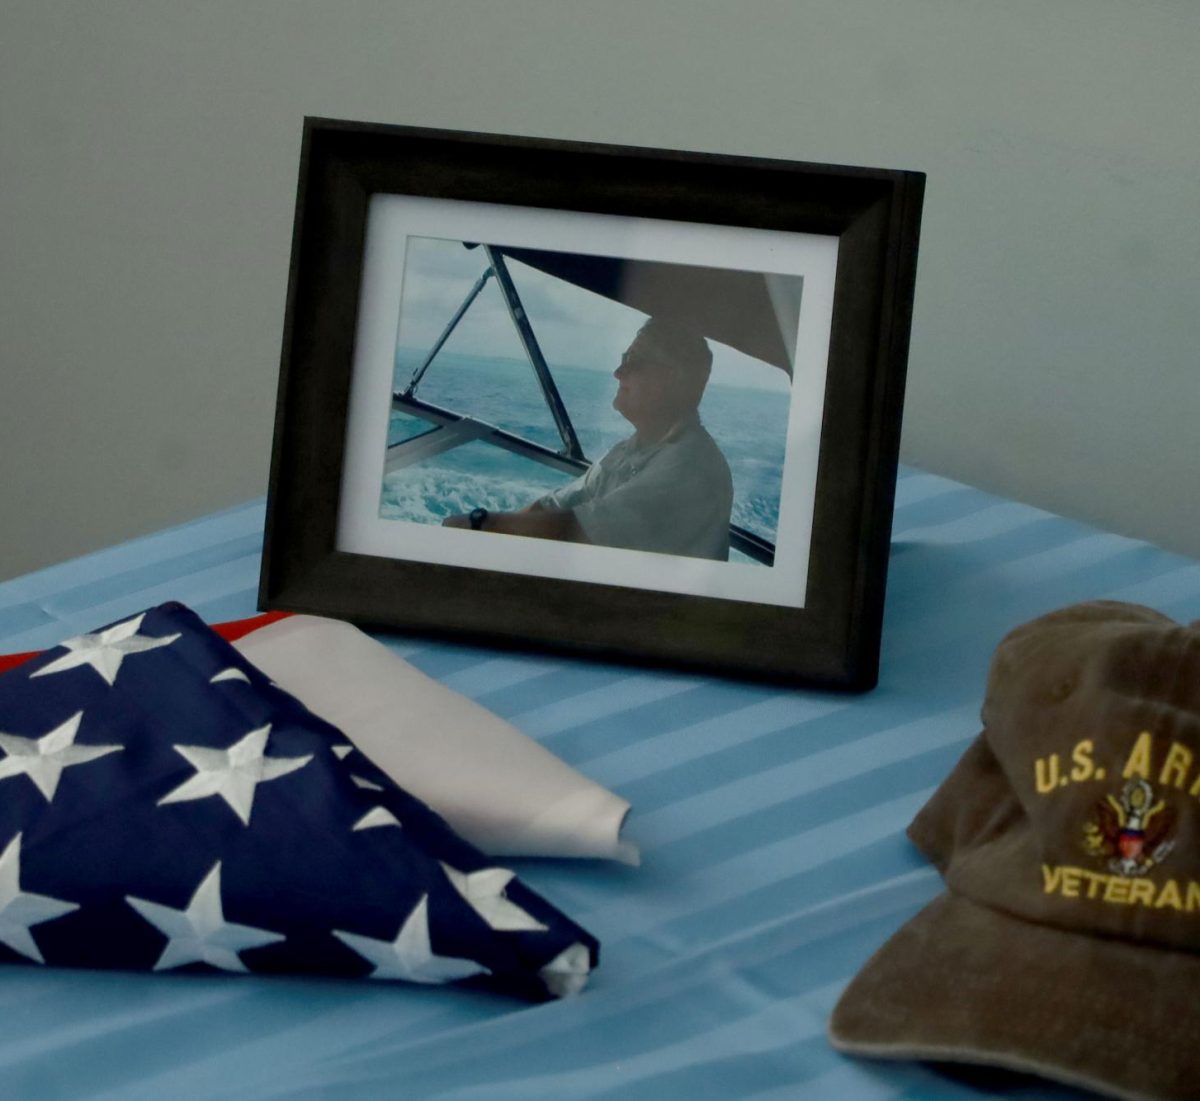 Haibels+military+service+flag%2C+U.S.+Verteran+hat+and+a+photo+of+him+on+a+boat+sit+on+the+welcome+table+for+his+Celebration+of+Life+service.+Haibels+memories+with+his+family+and+friends+were+shared+at+the+event+through+photos+and+storytelling.